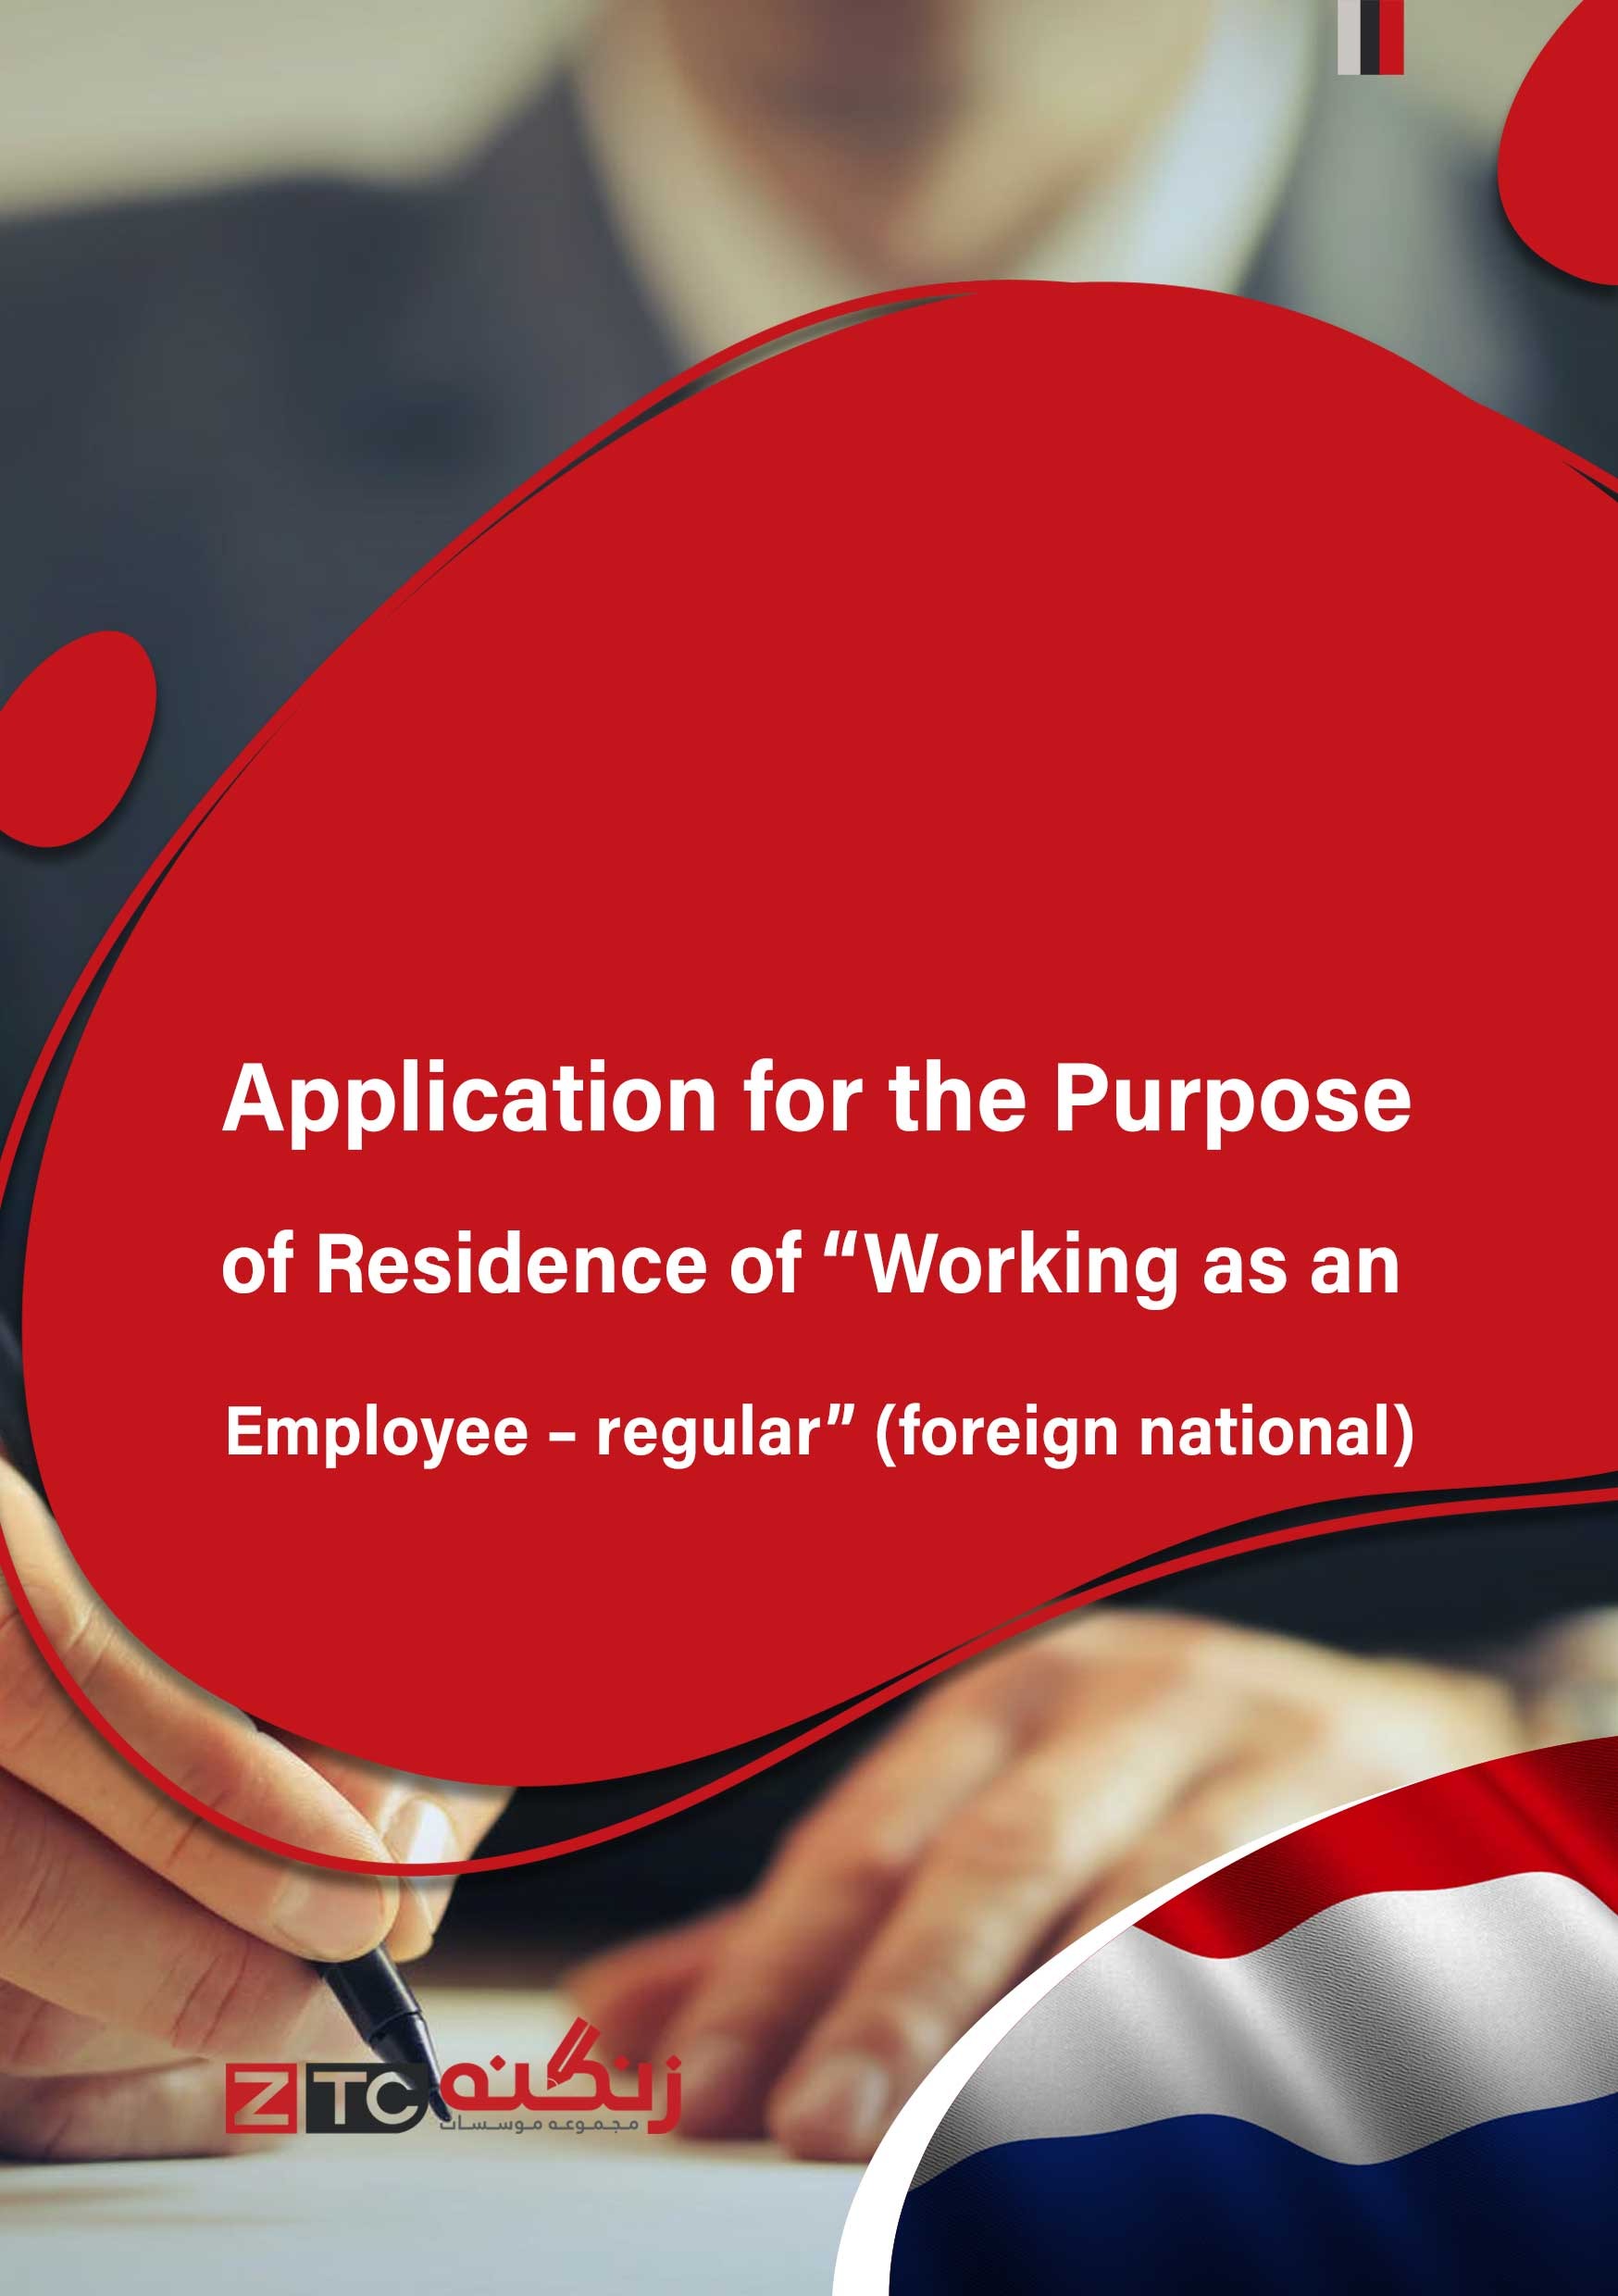 Application for the Purpose of Residence of “Working as an Employee – regular” (foreign national)